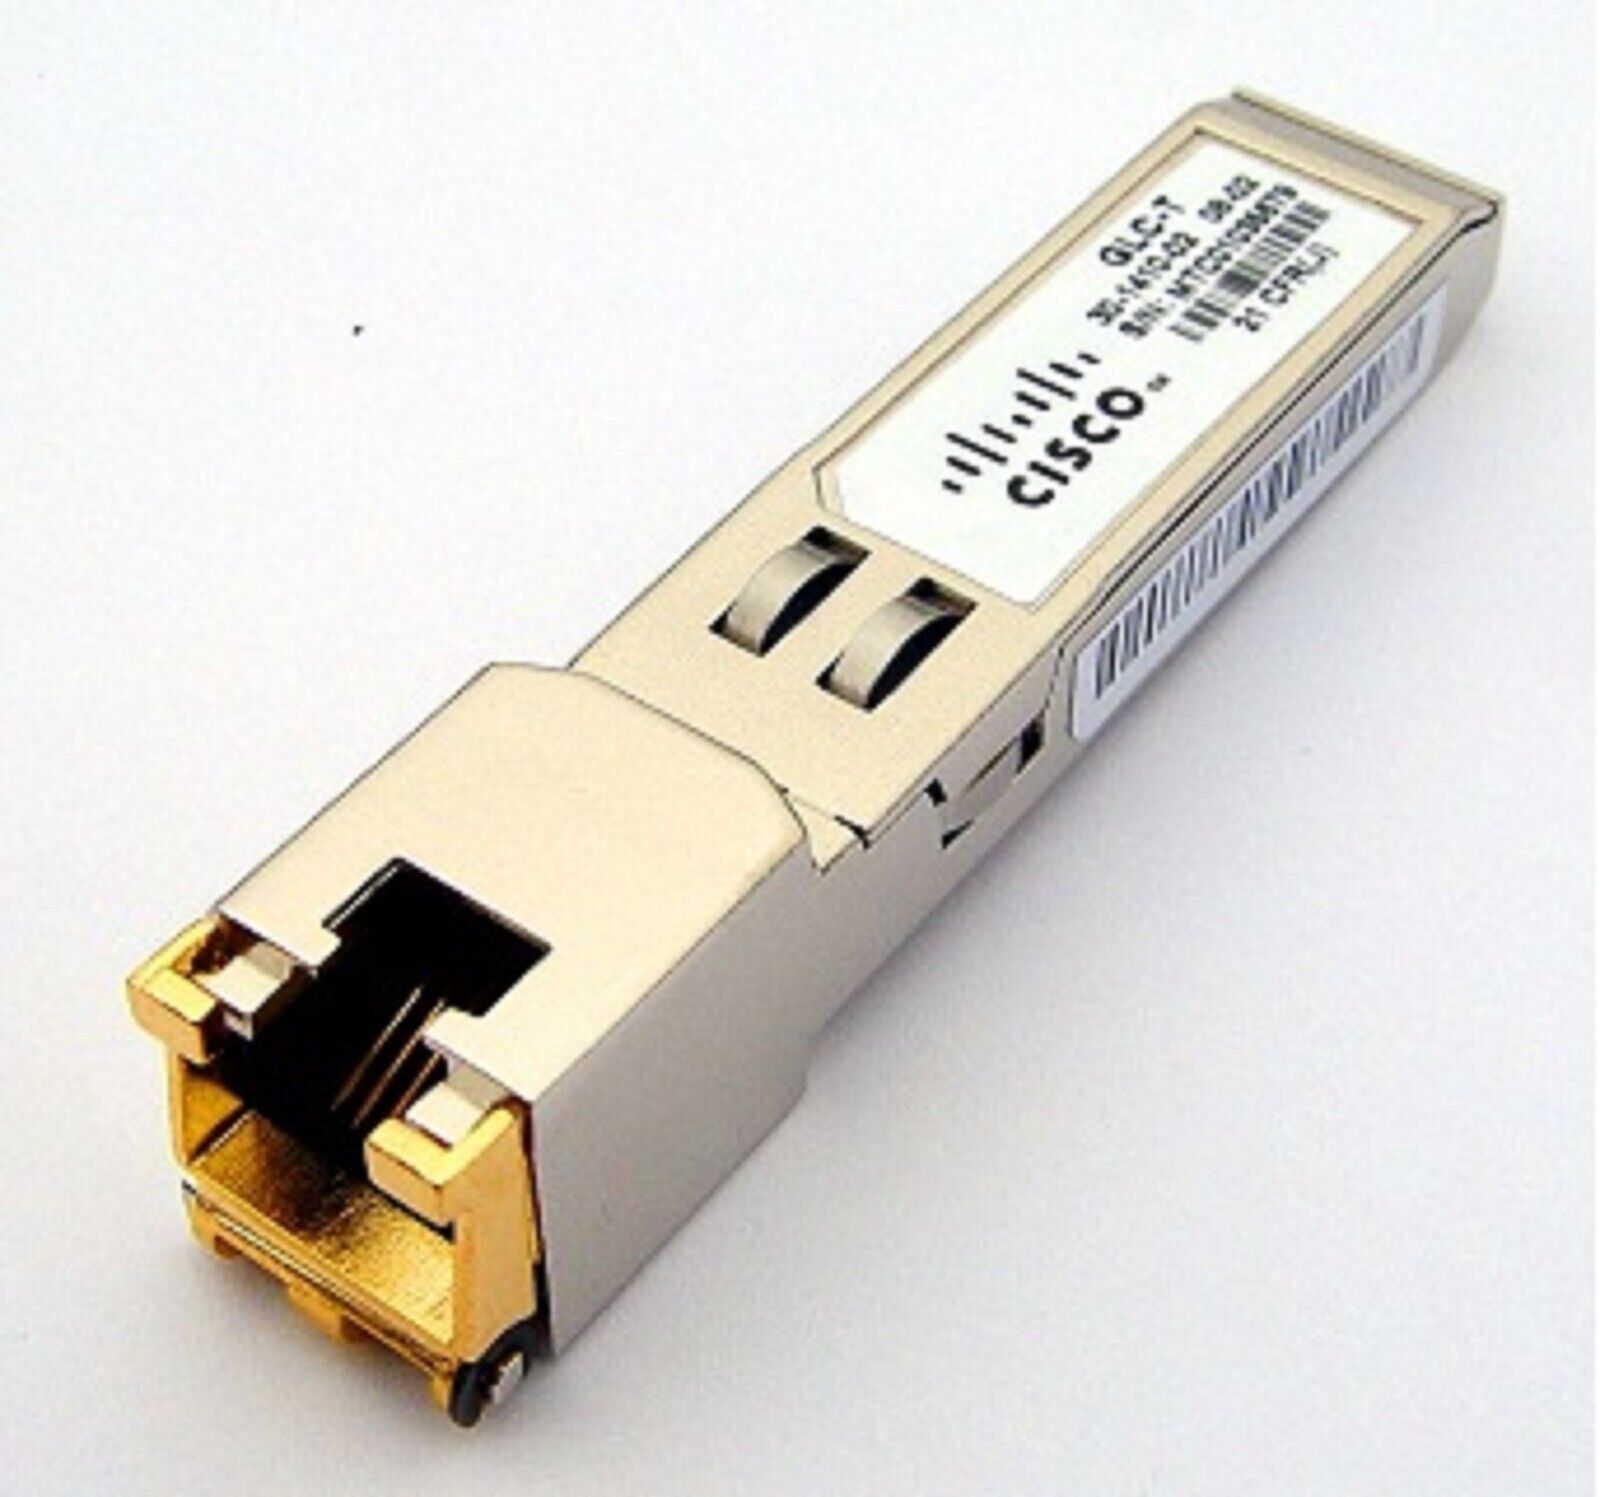 Cisco 30-1410-04 1000BASE-T SFP Transceiver- Lower Price than Used- Buy One Now